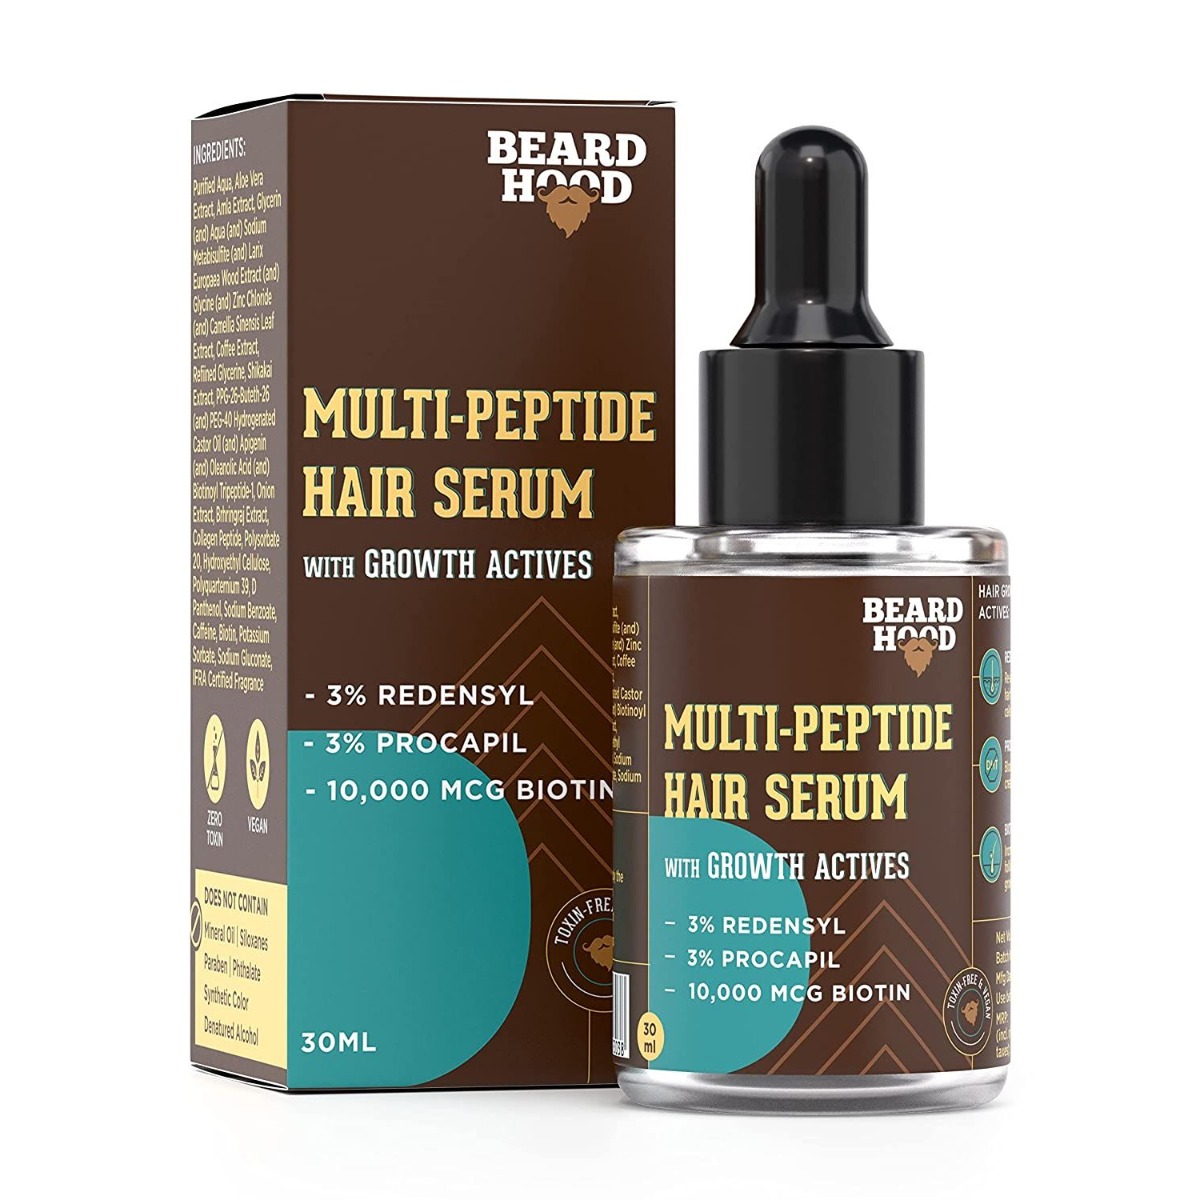 Beardhood Multi-Peptide Hair Serum with Growth Actives, 30ml